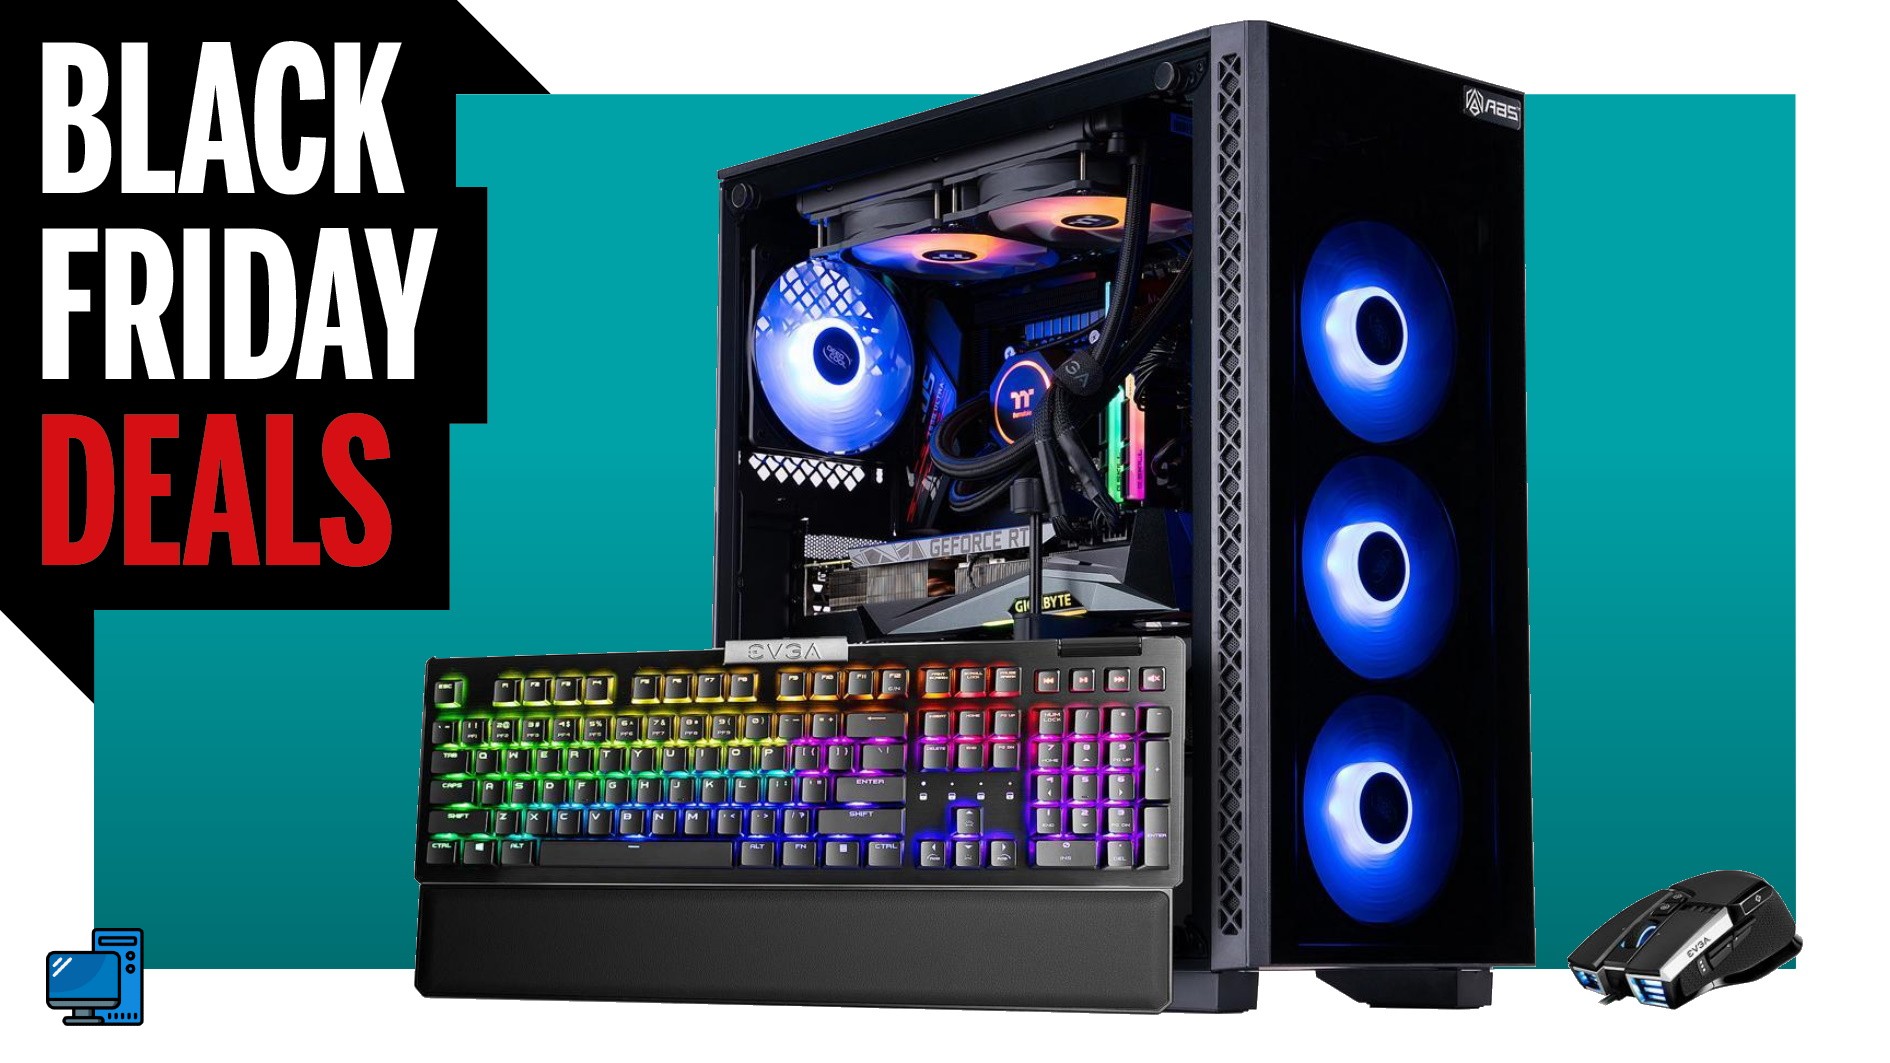 Best black friday deals for gaming PC